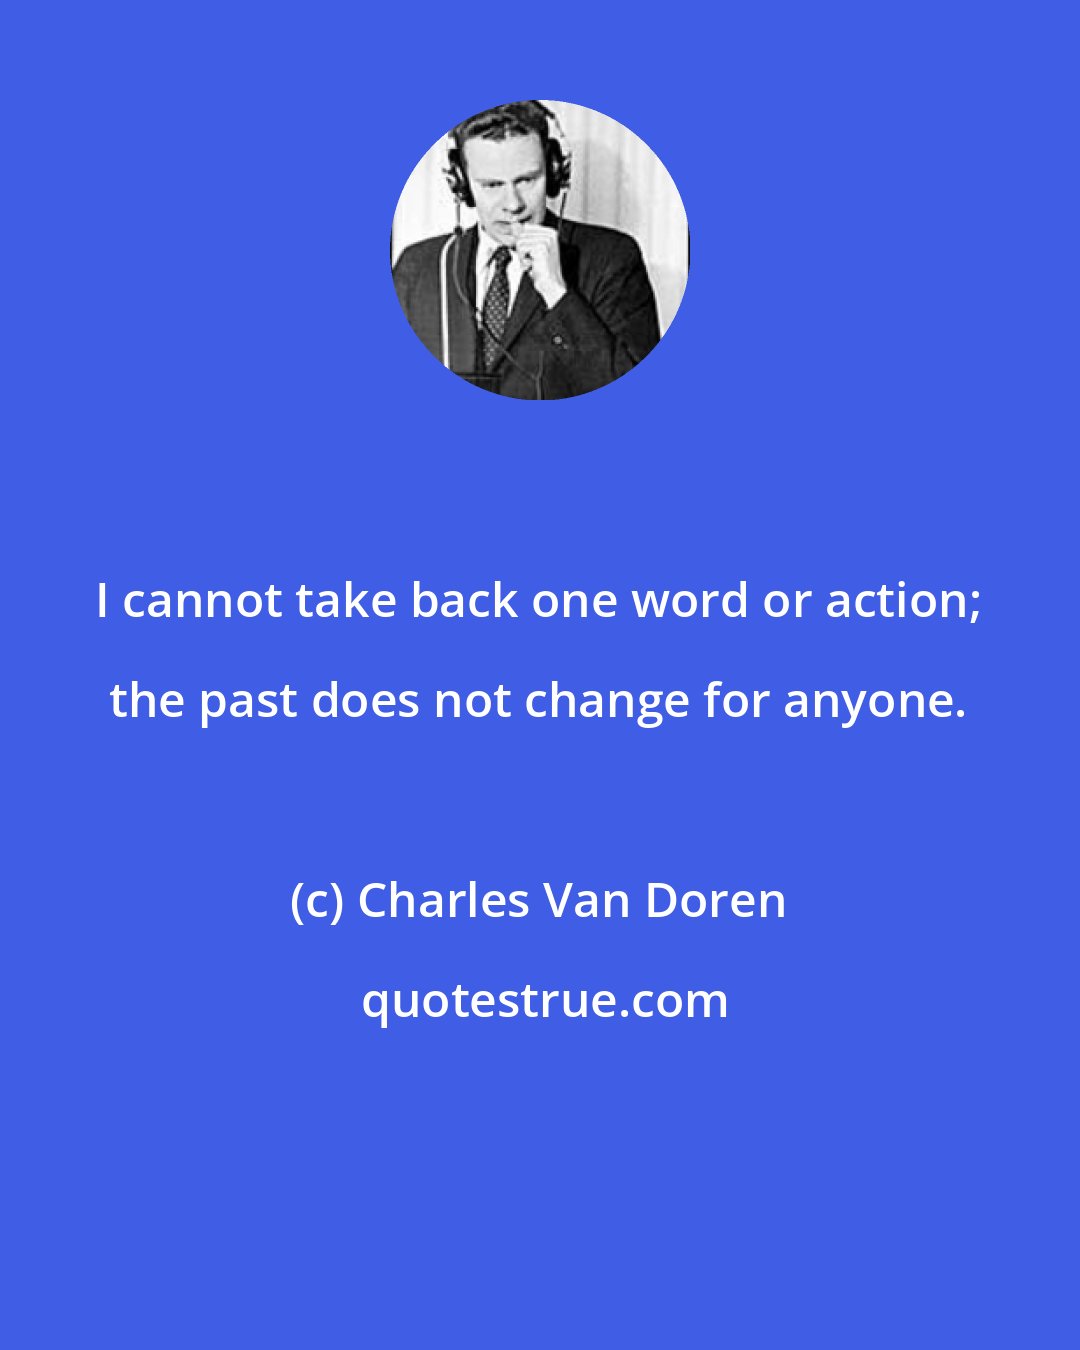 Charles Van Doren: I cannot take back one word or action; the past does not change for anyone.